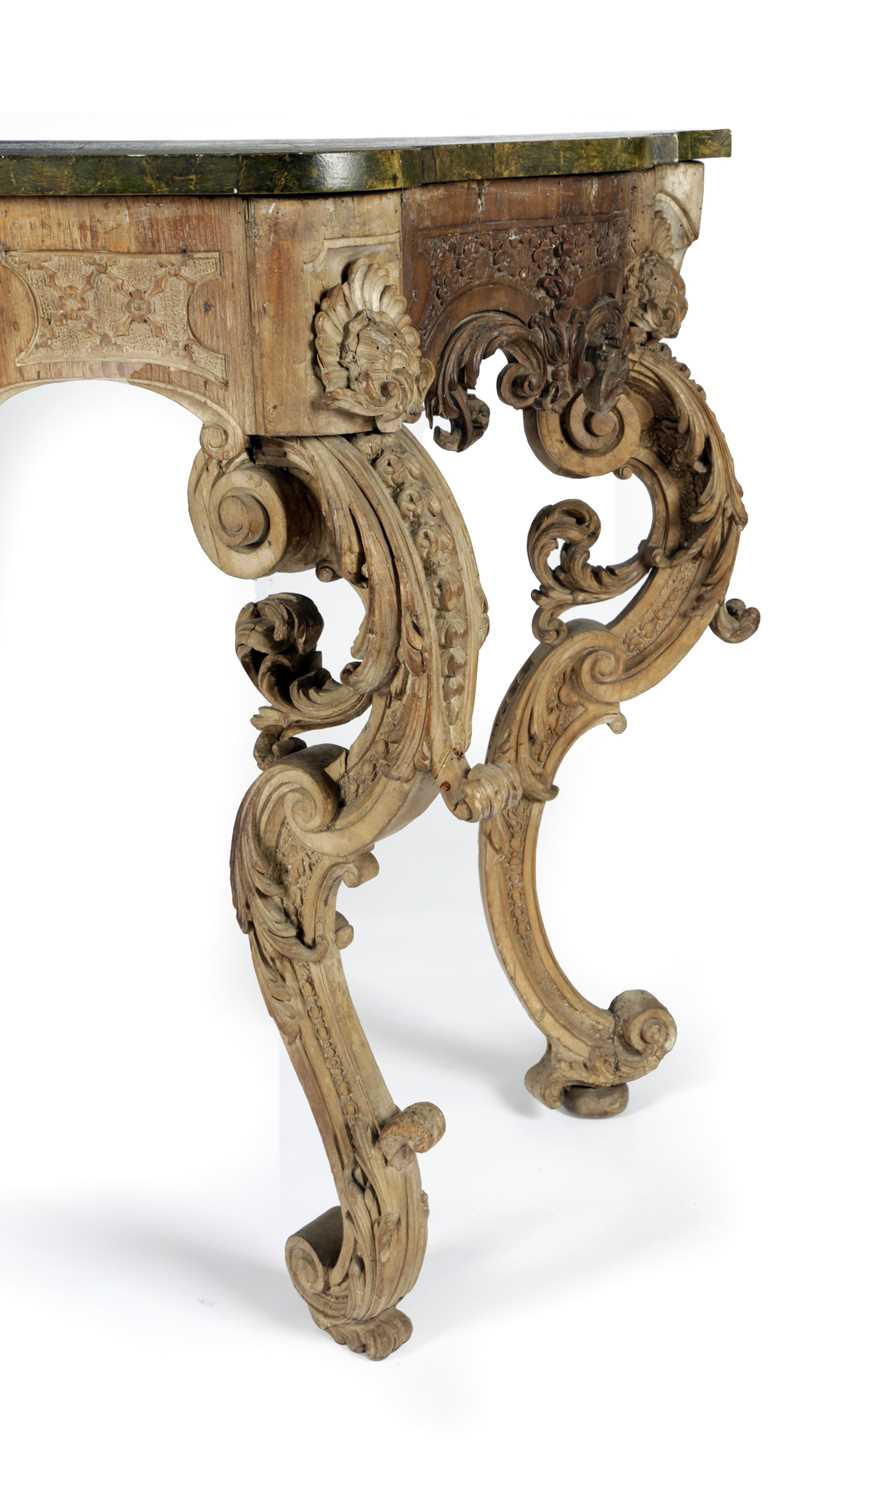 A ROCOCO CARVED WALNUT CONSOLE TABLE POSSIBLY GERMAN OR ITALIAN, 18TH CENTURY AND LATER the later - Image 4 of 6